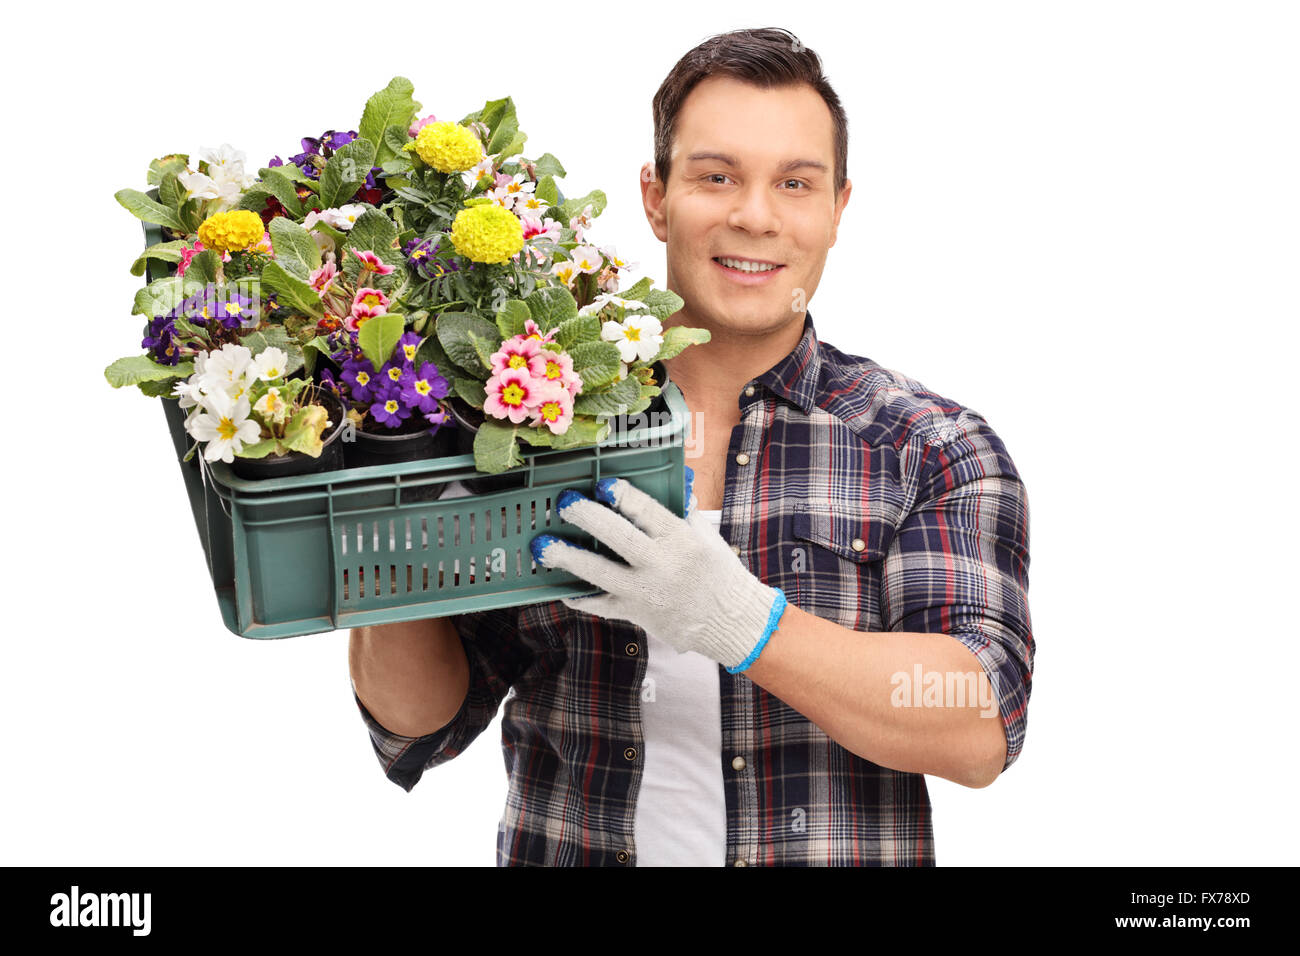 Man holding a crate of flowers isolated on white background Stock Photo